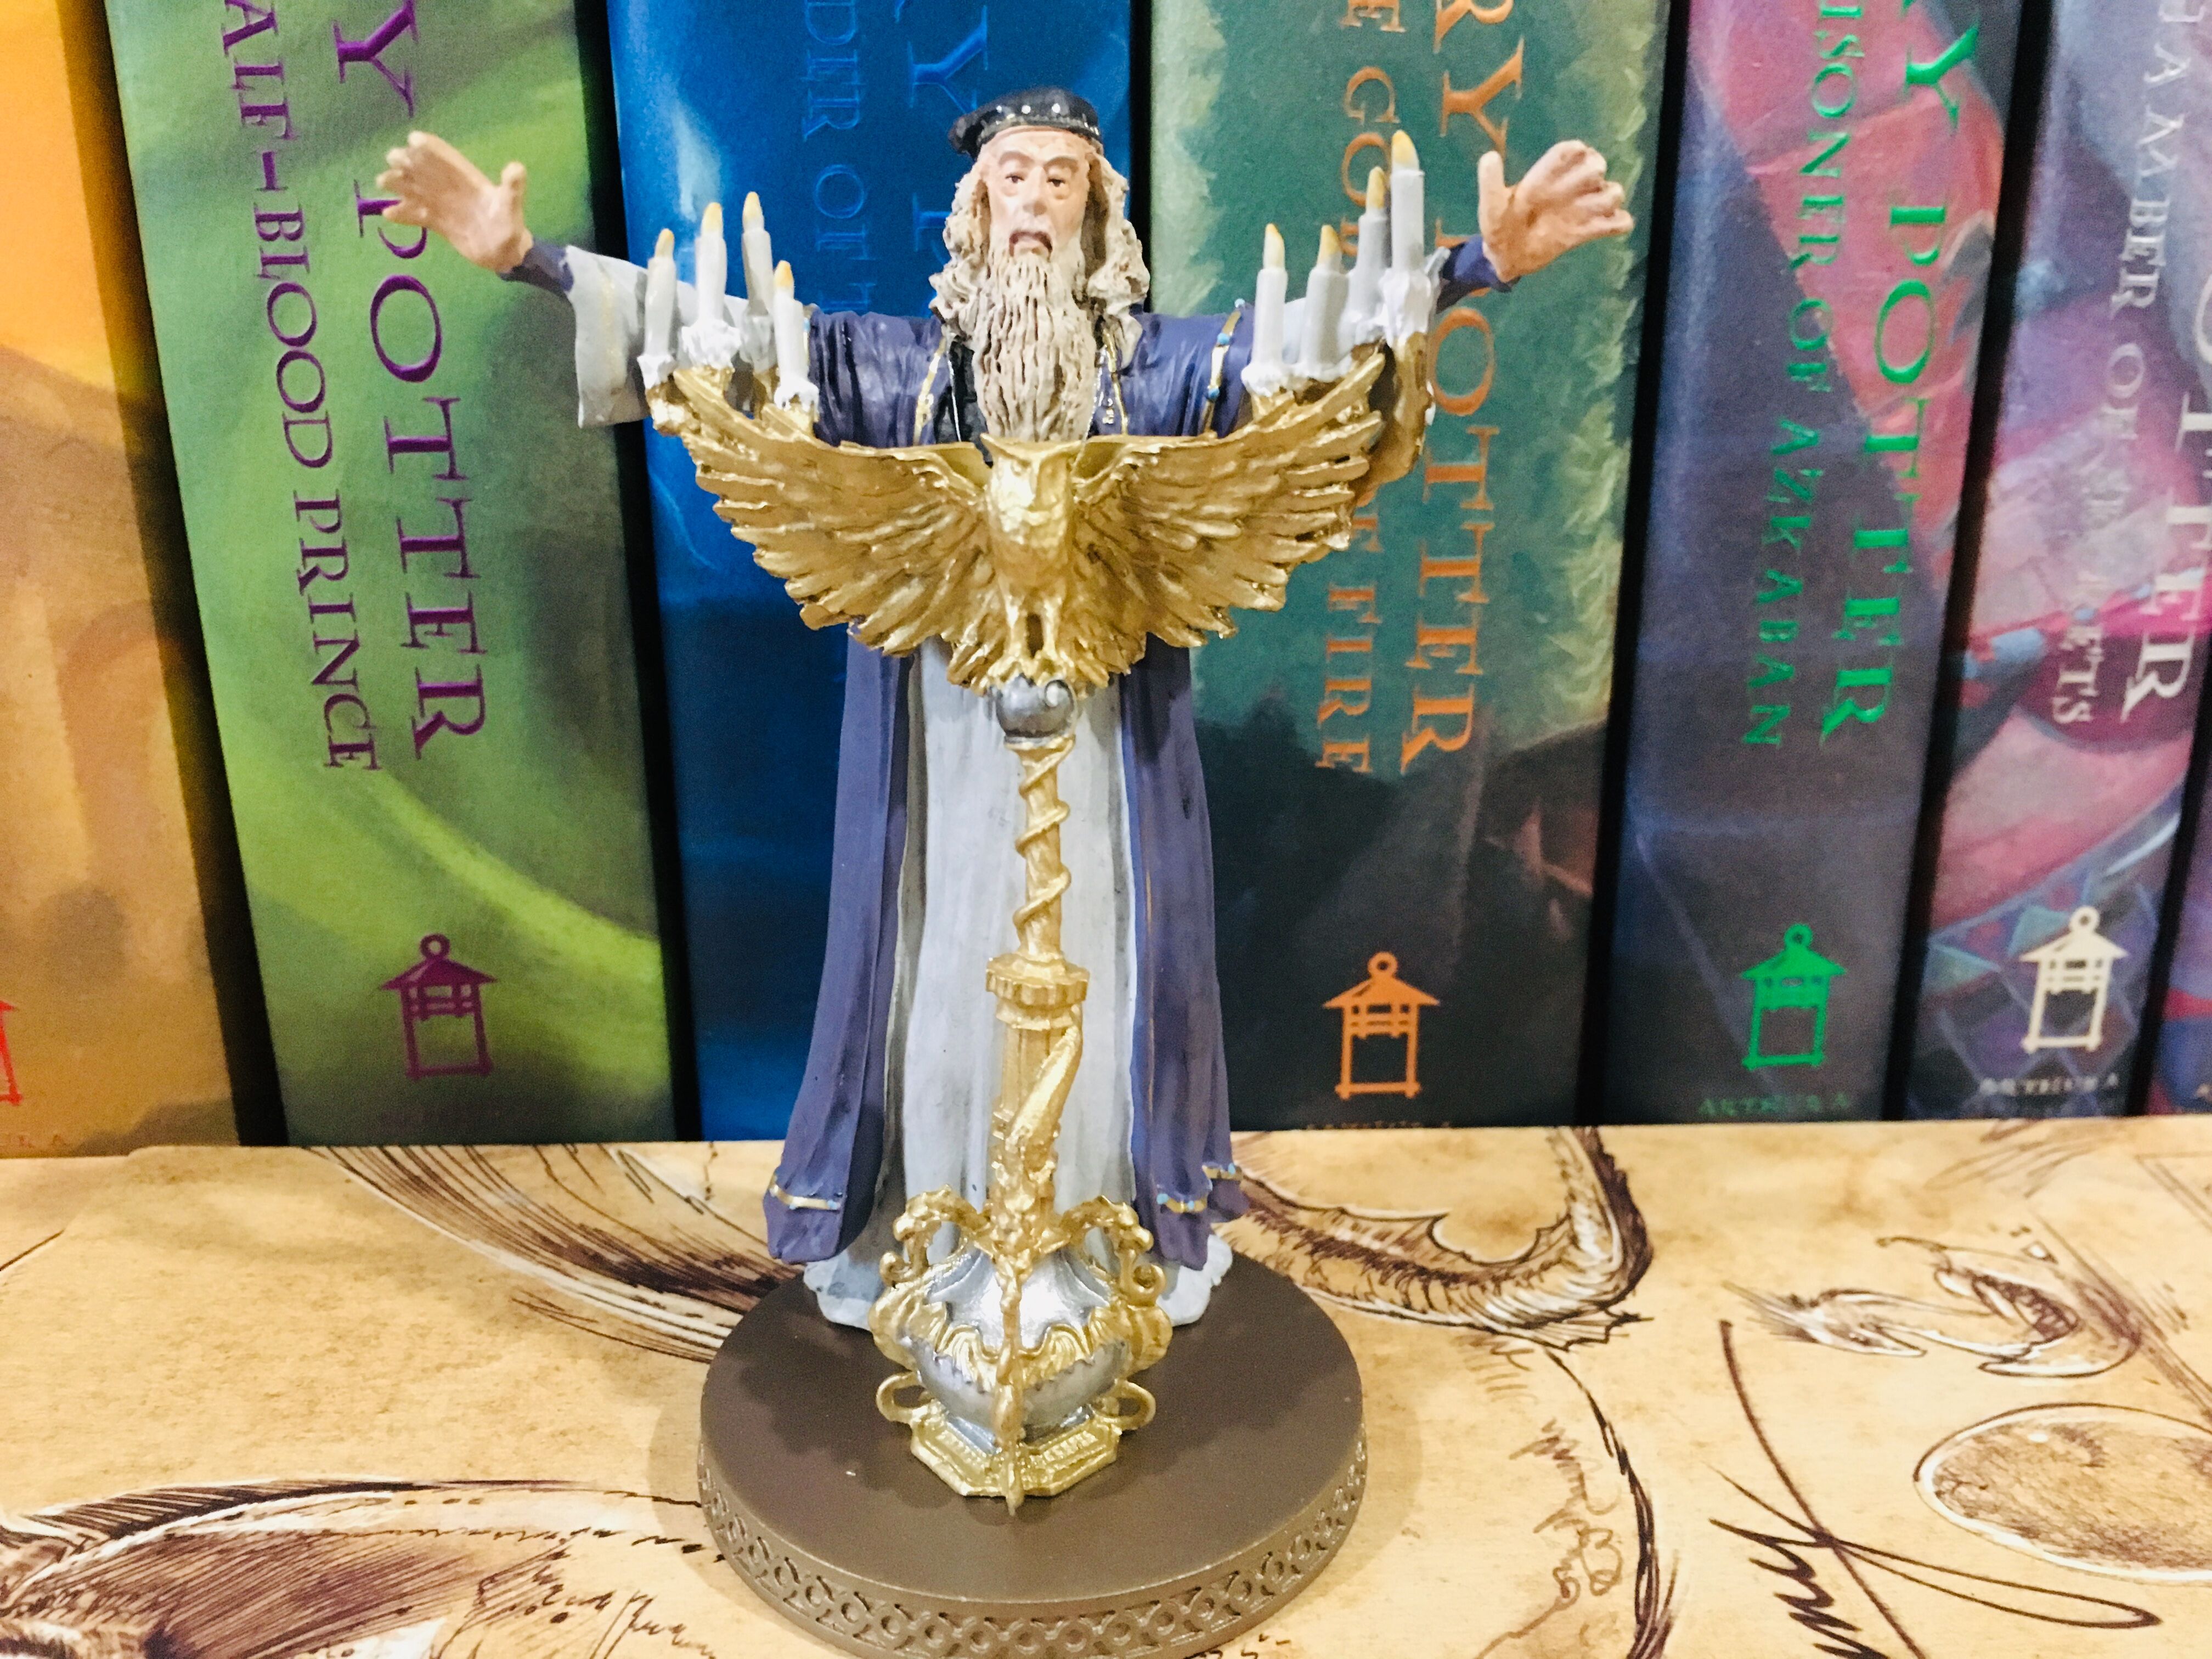 One can note that the familiar characteristics of Dumbledore’s face have been captured perfectly by Eaglemoss artists.